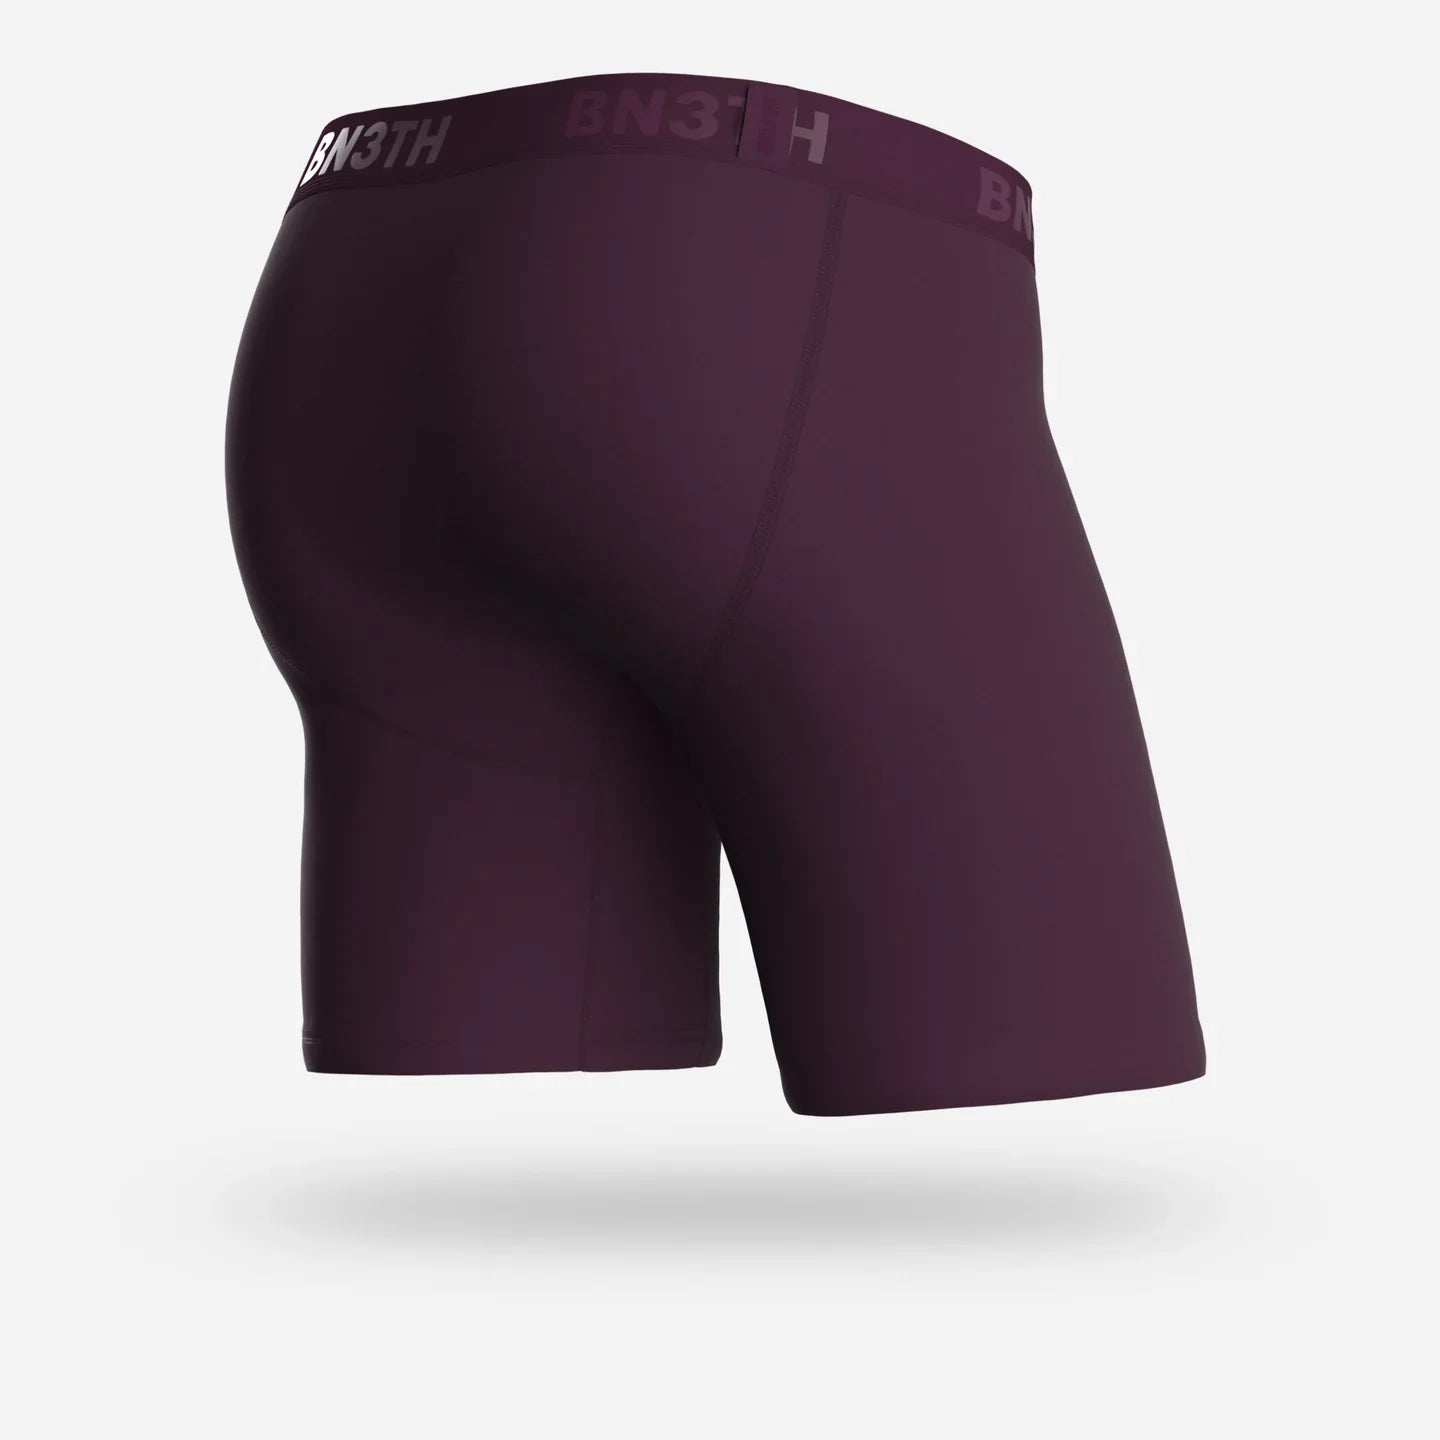 Classic Boxer Brief in Solid Cabernet